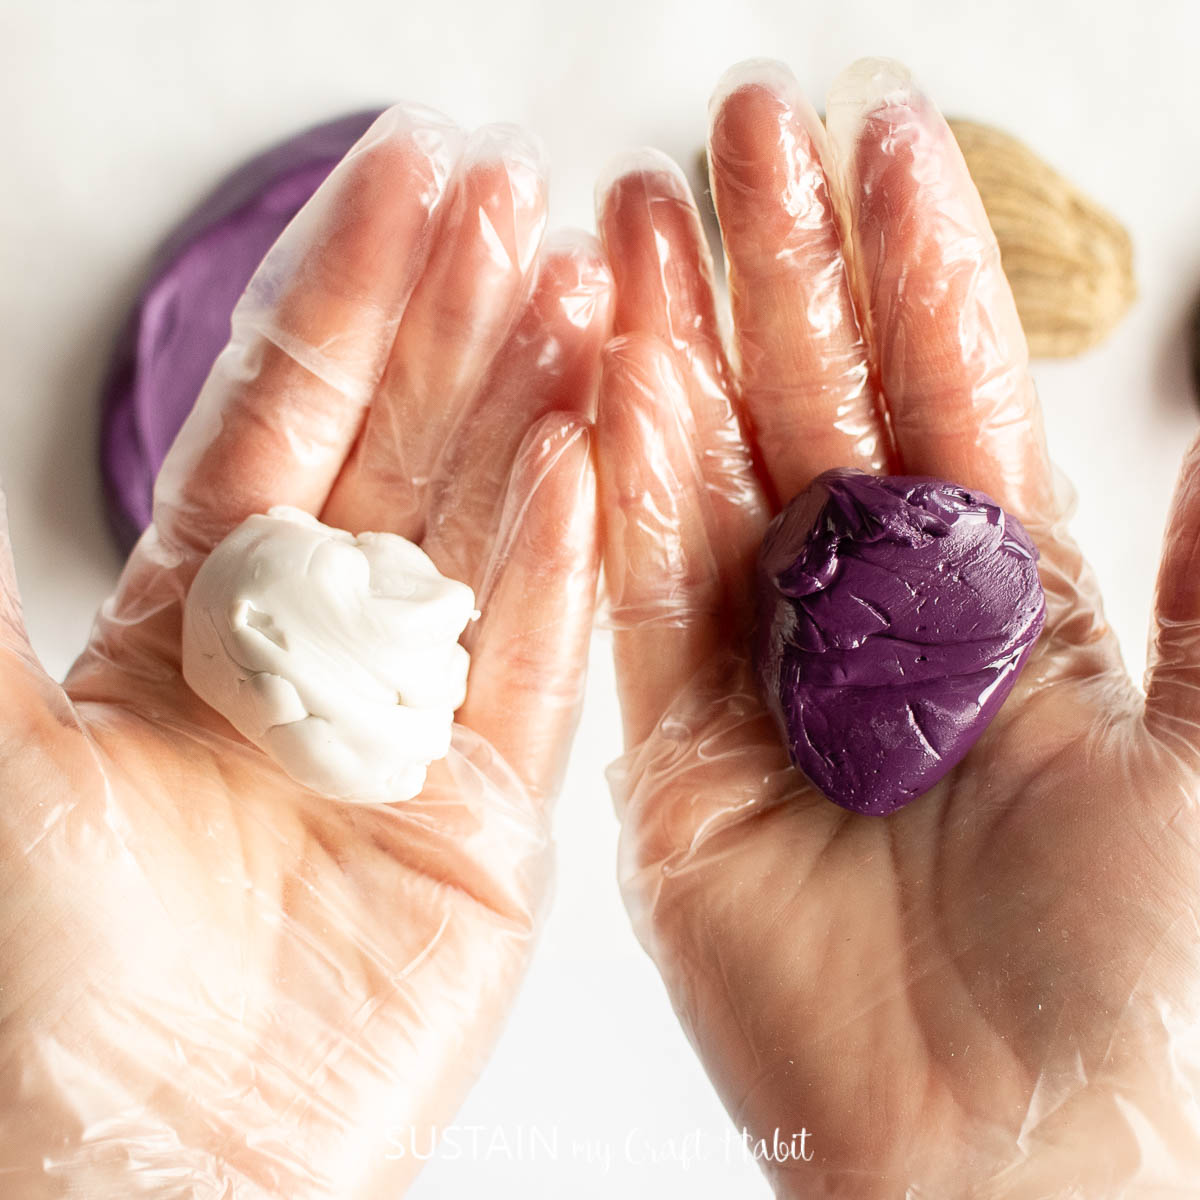 Hands holding a piece of white and purple silicone putty.